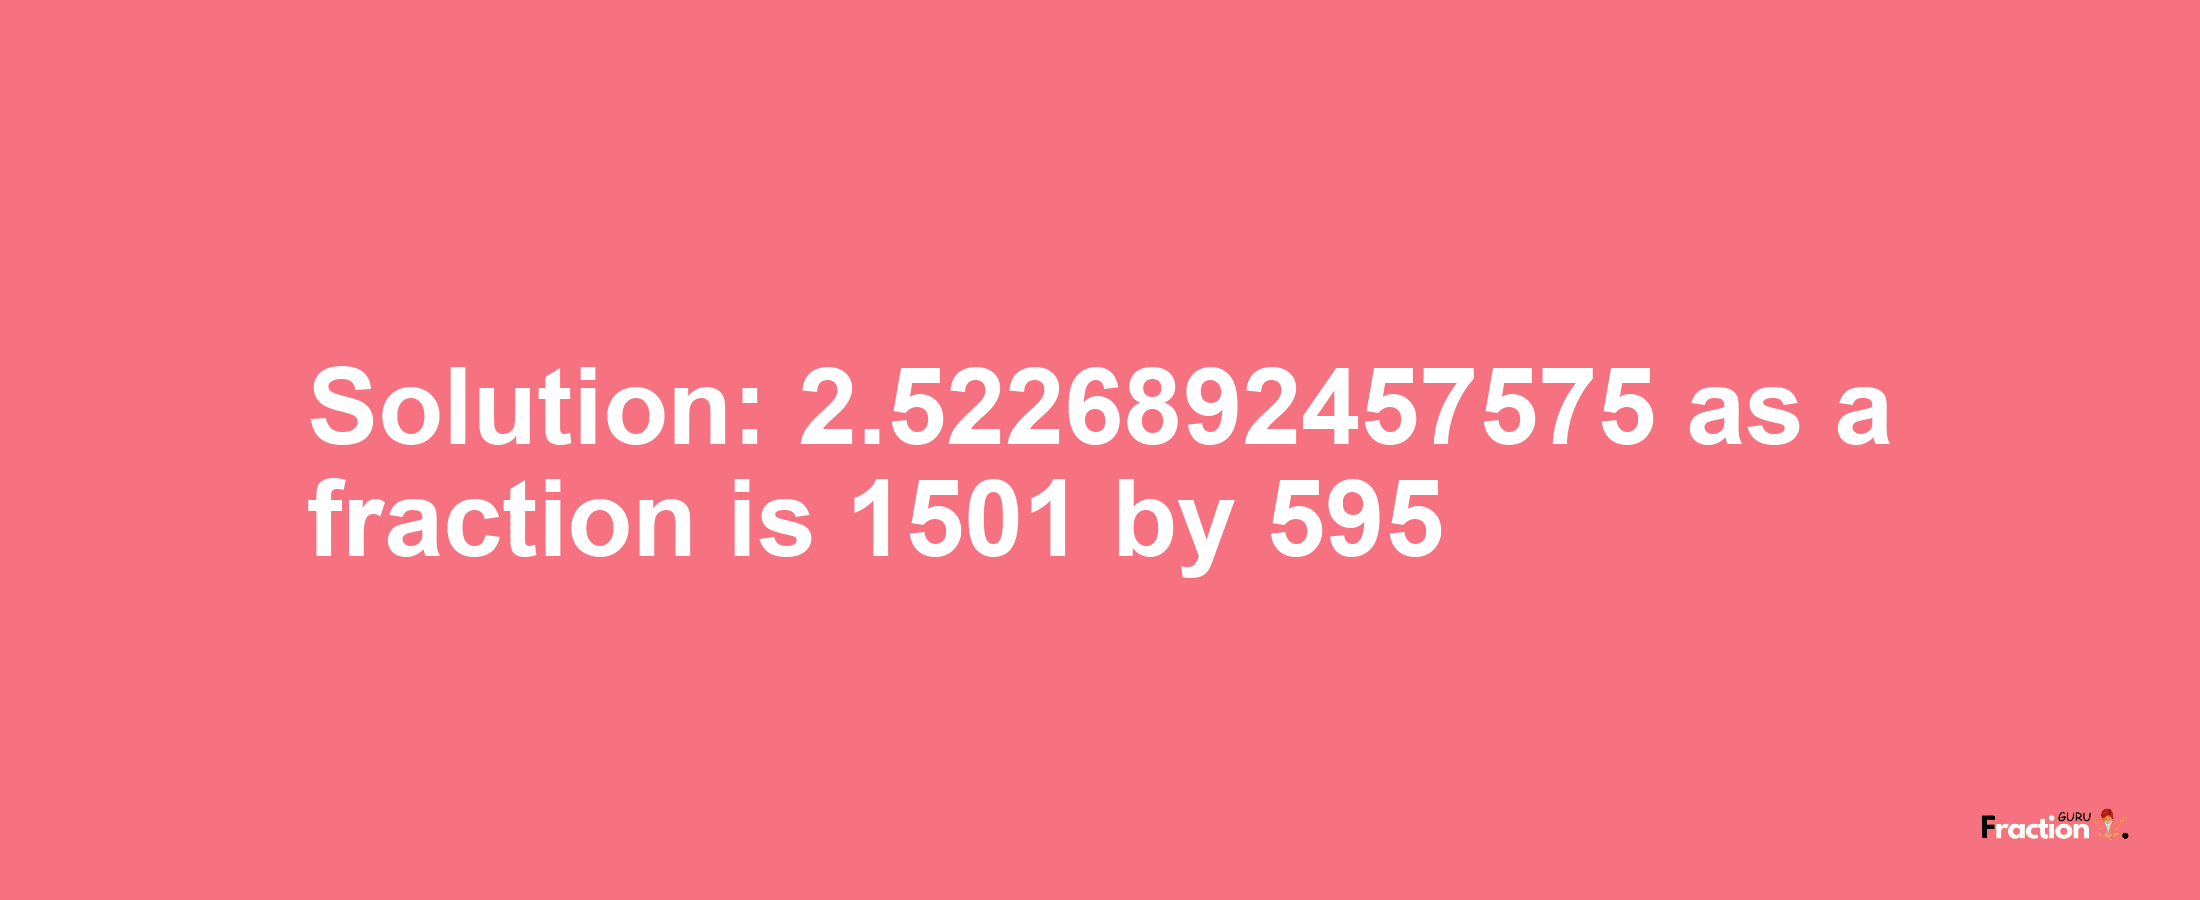 Solution:2.5226892457575 as a fraction is 1501/595